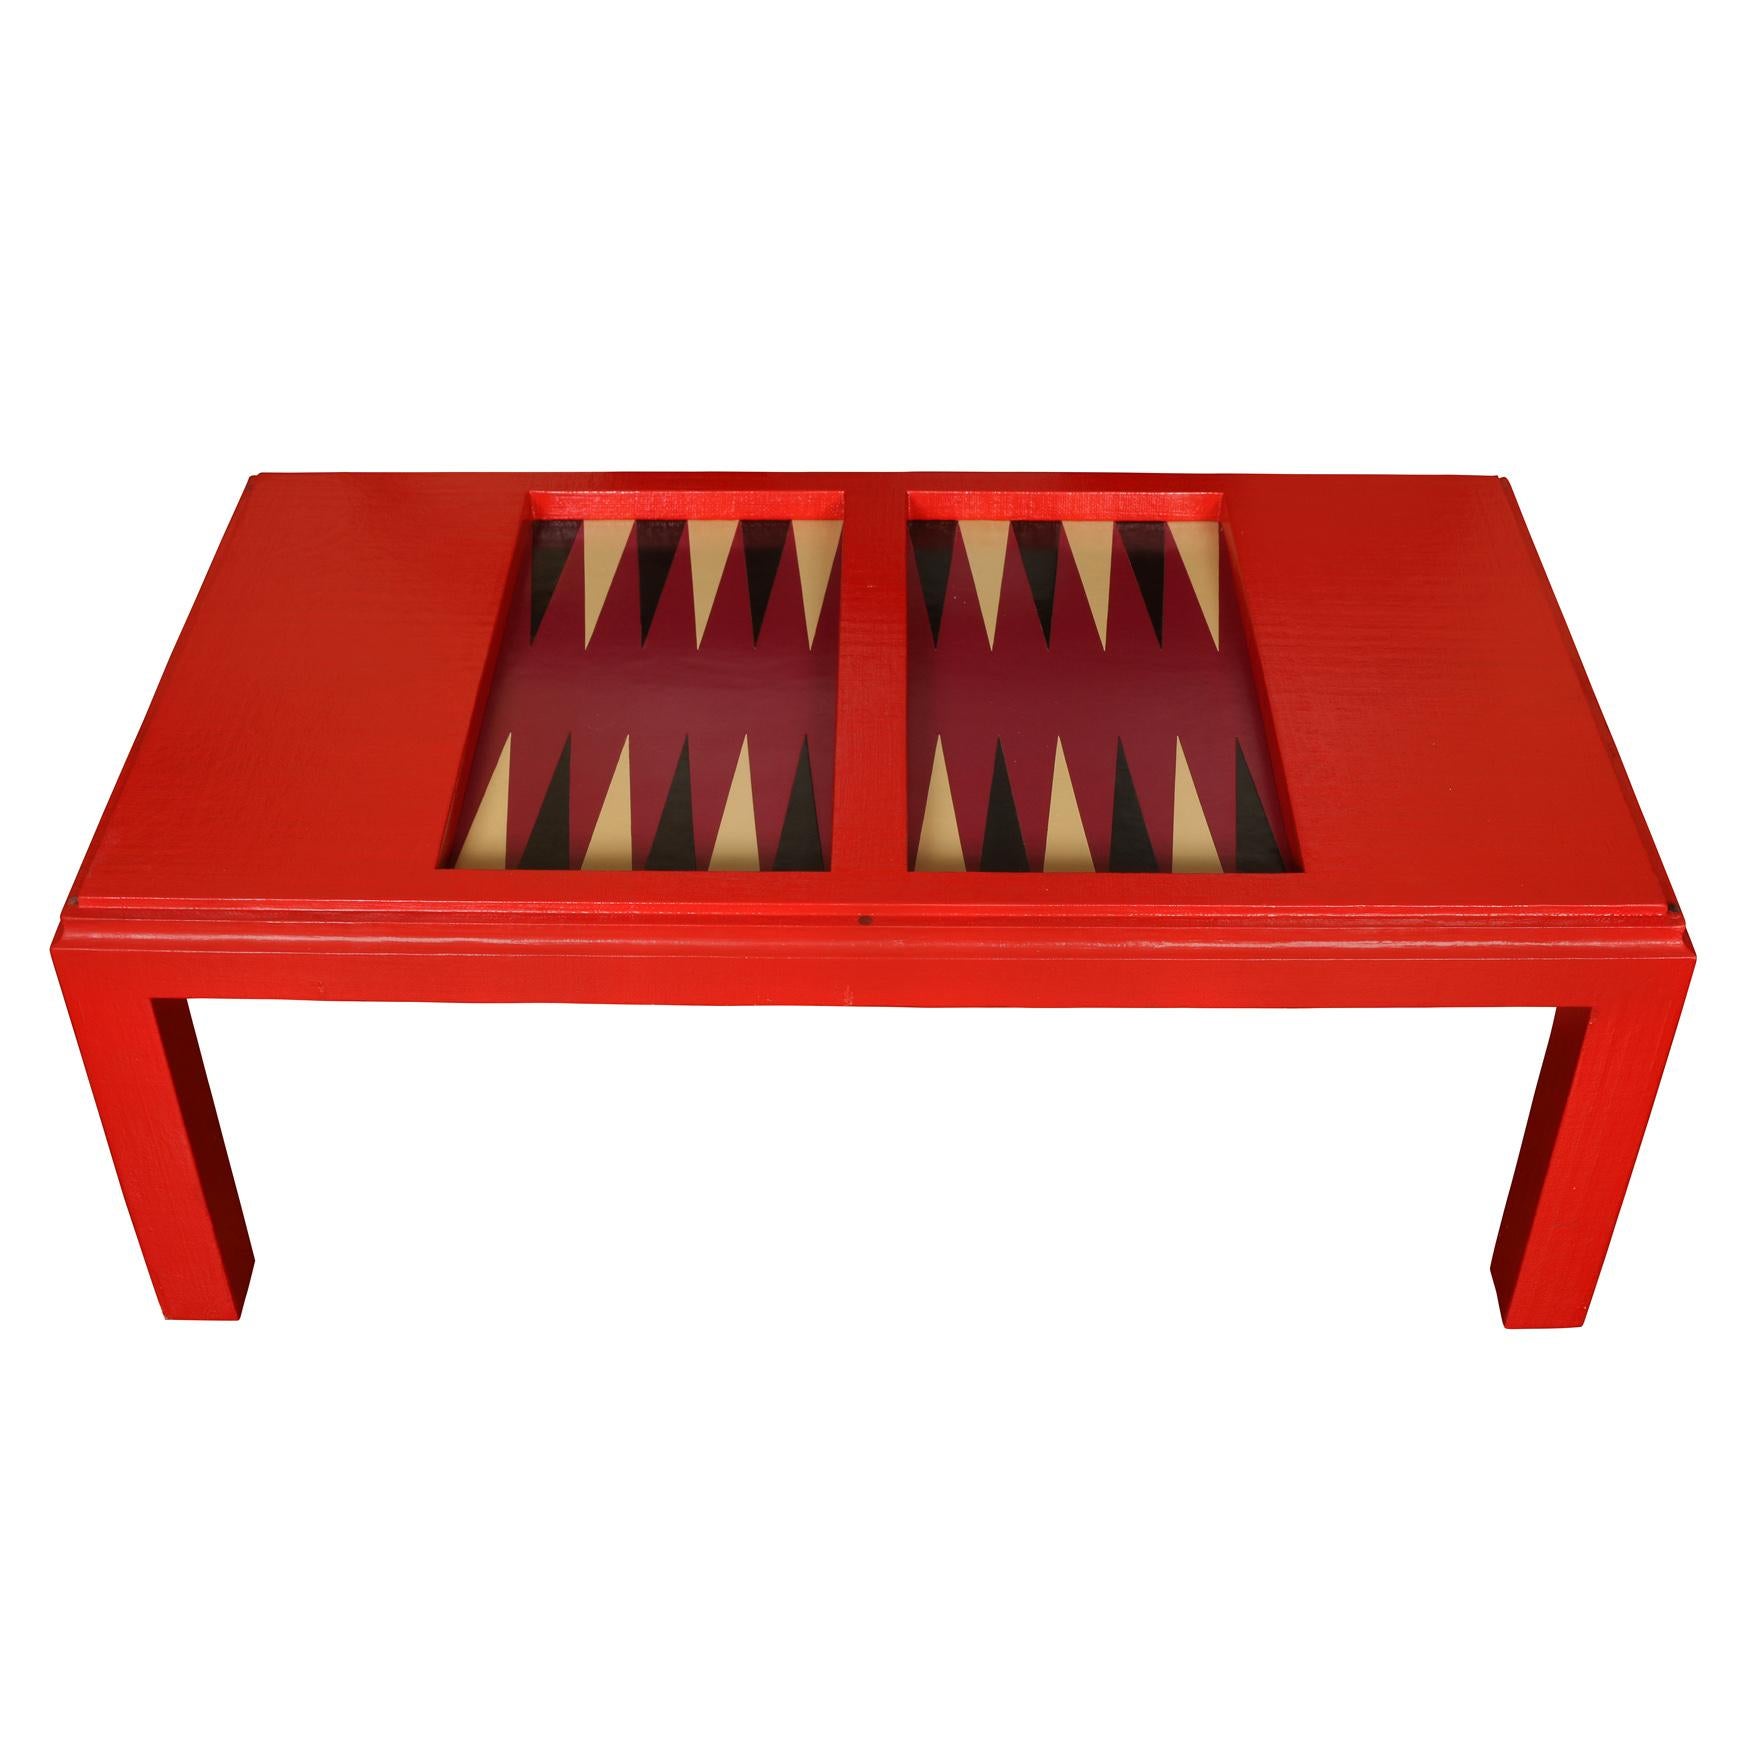 Karl Springer style backgammon coffee table in red lacquered linen with removable top and inset game board.